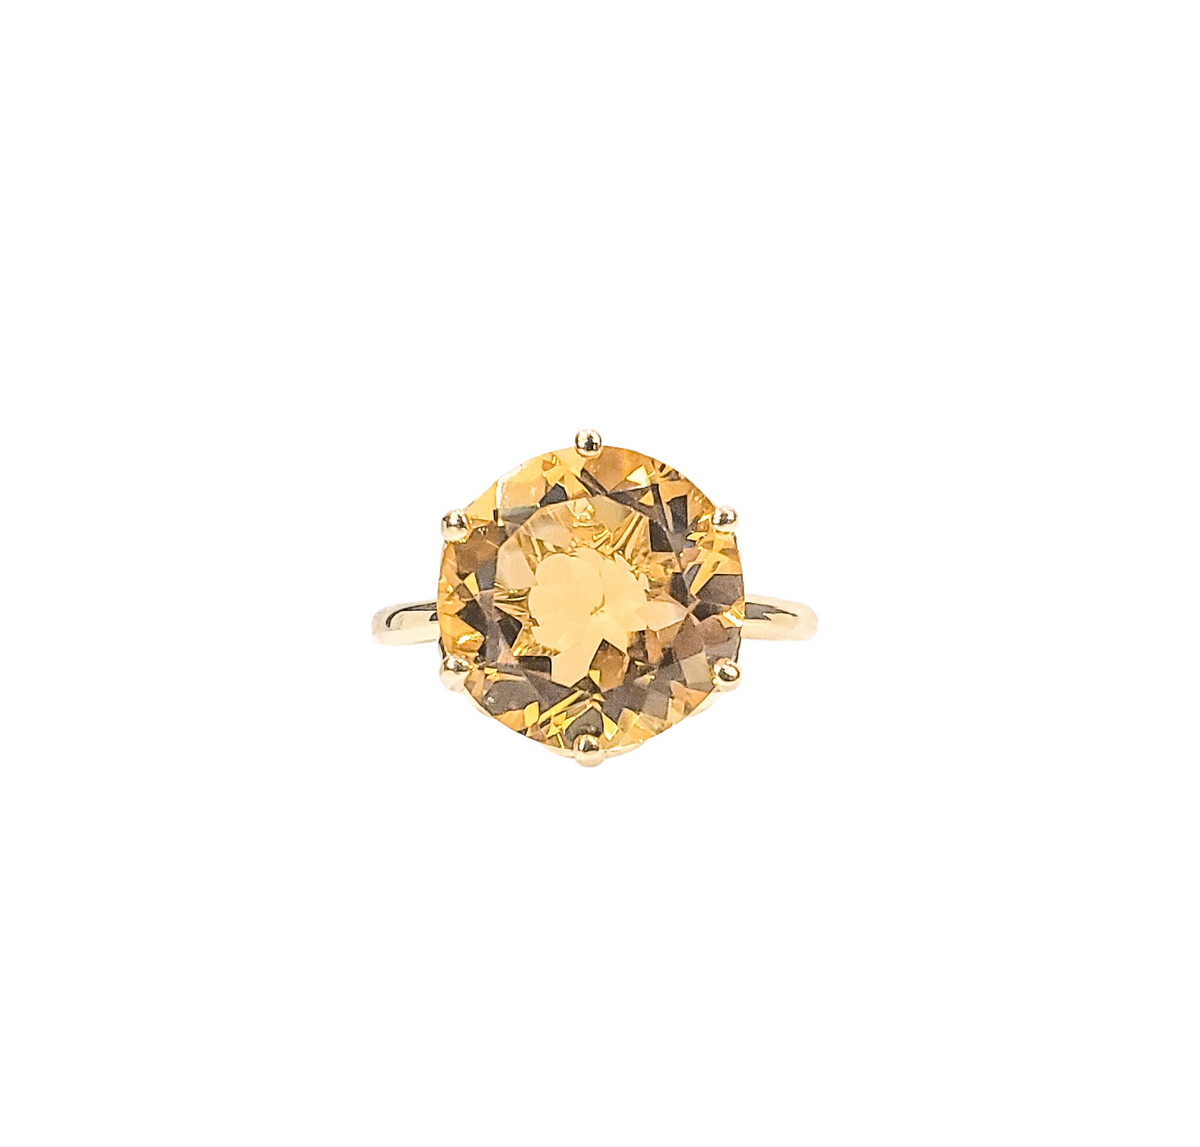 10K Yellow Gold 12mm Citrine Ring - Size 7